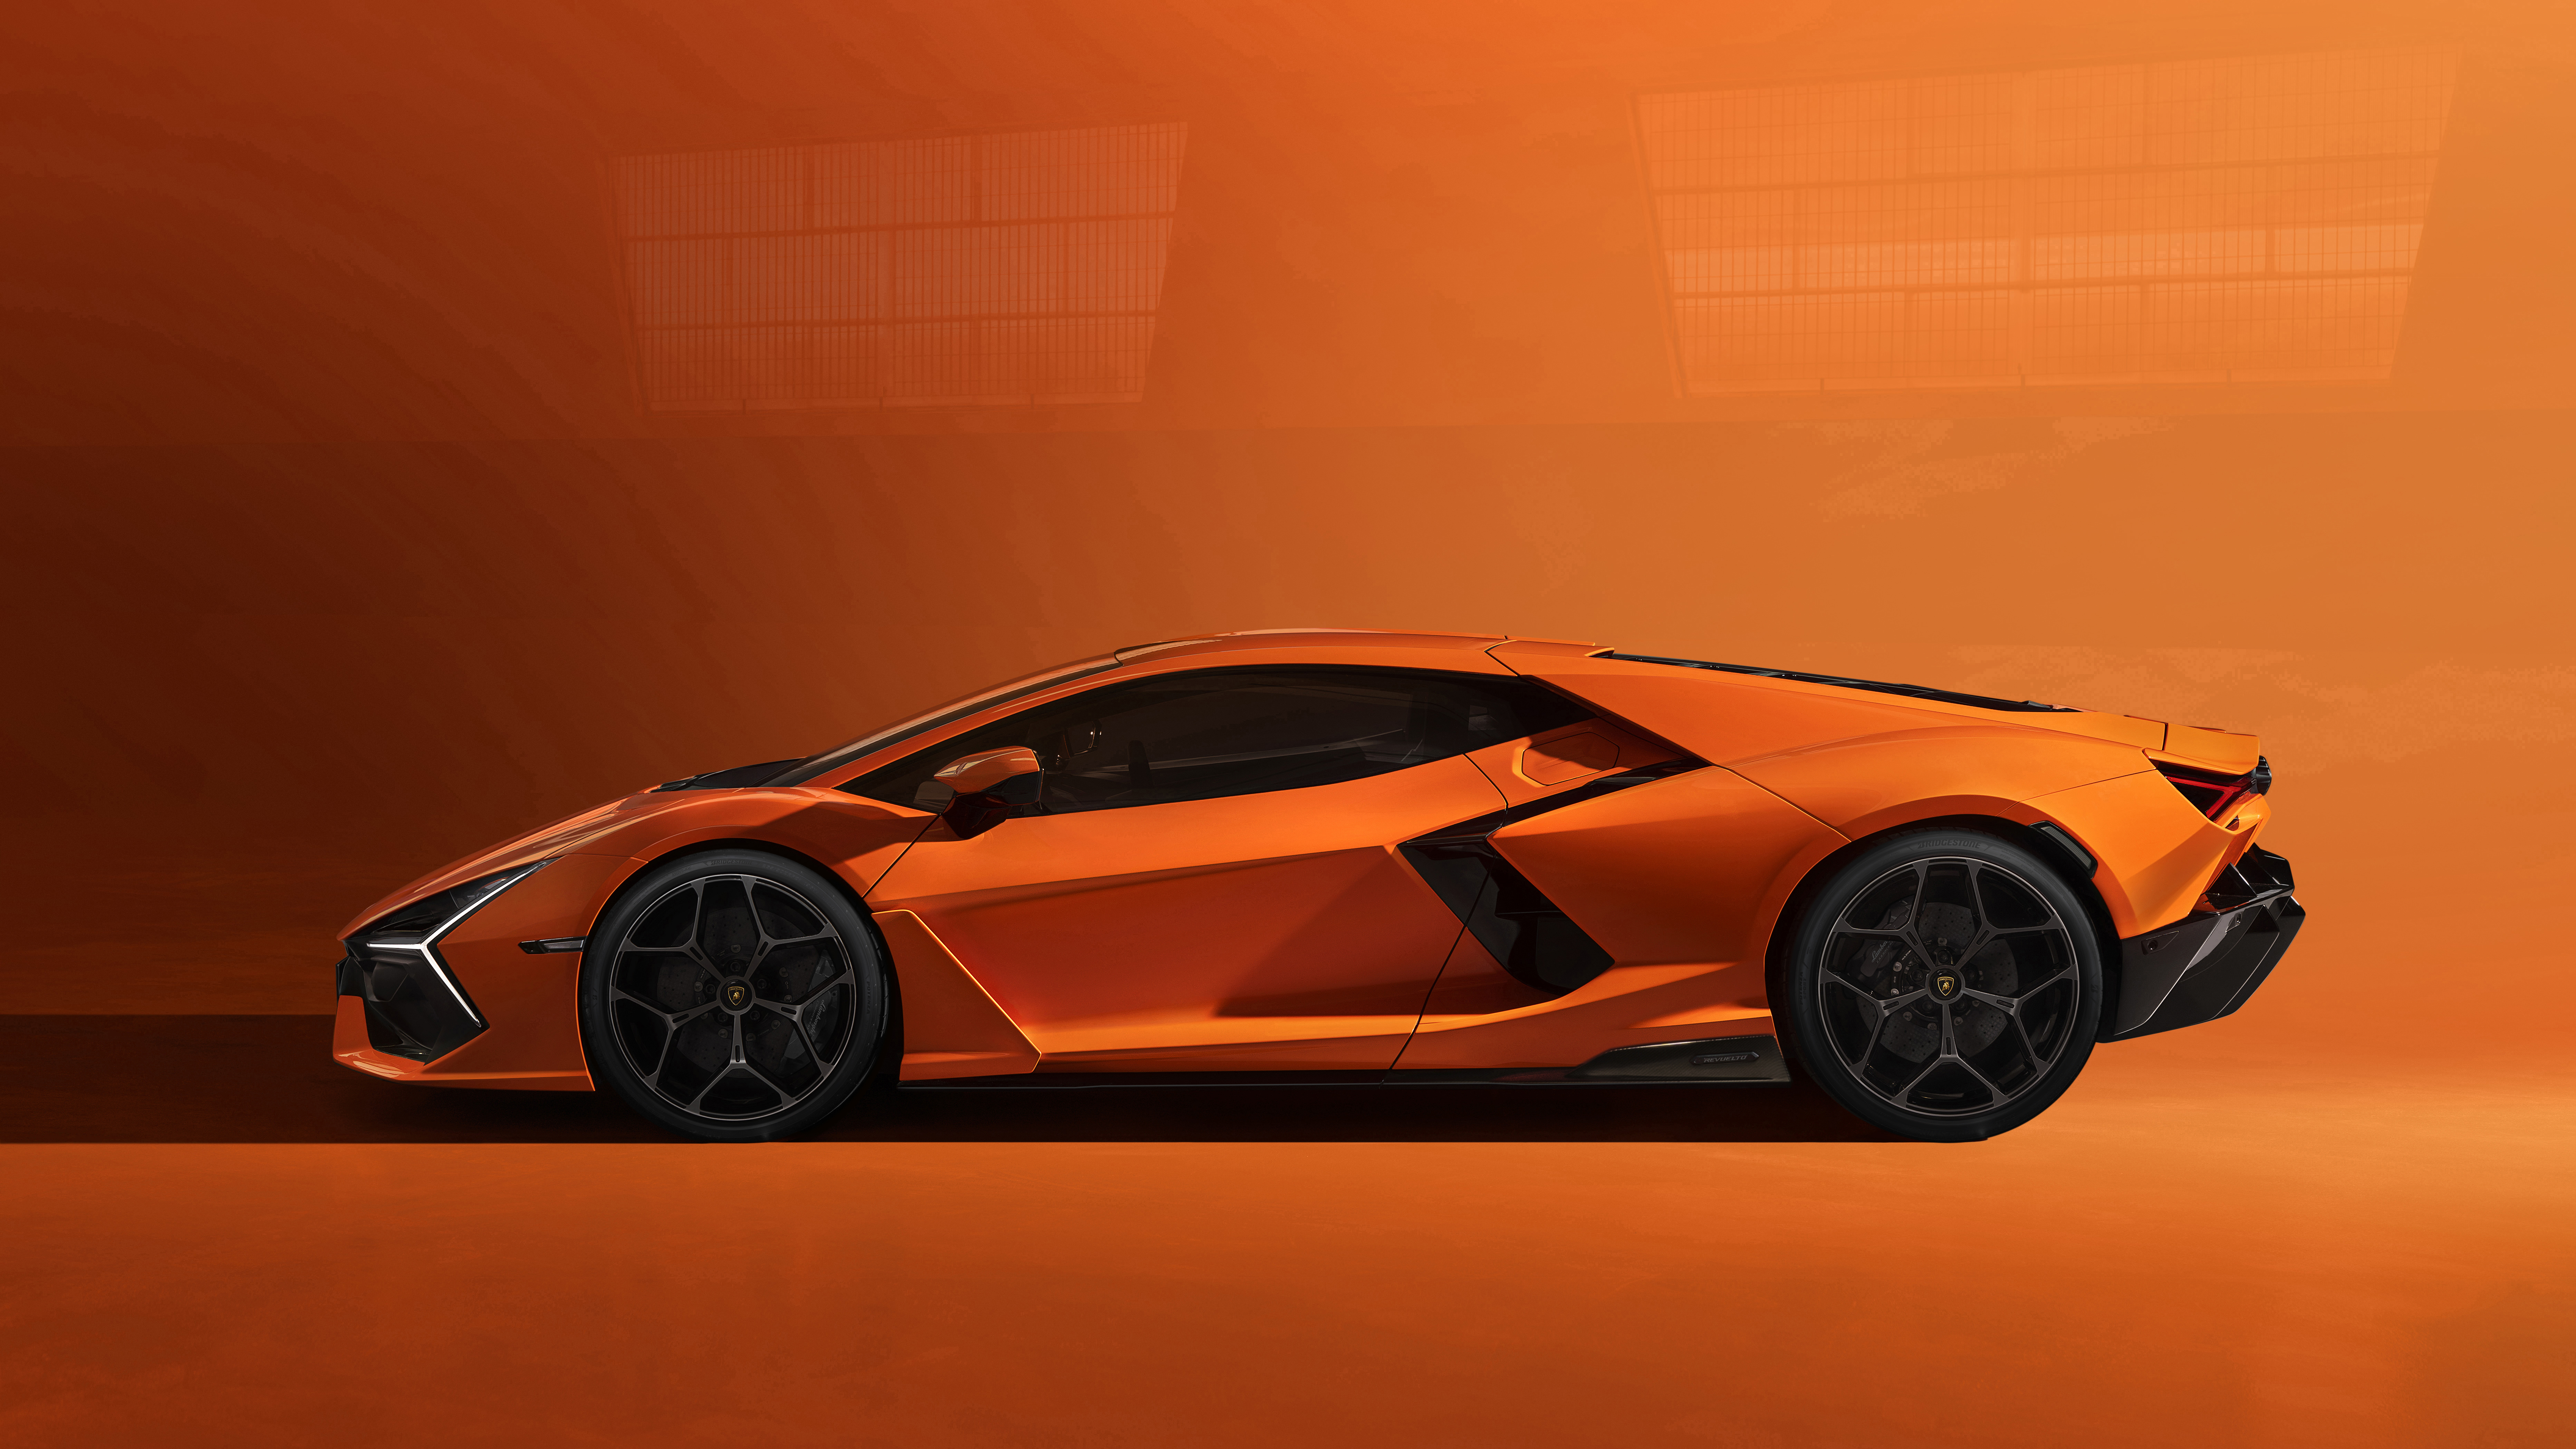 Preview: Lamborghini Aventador Ultimae revealed as last bull with